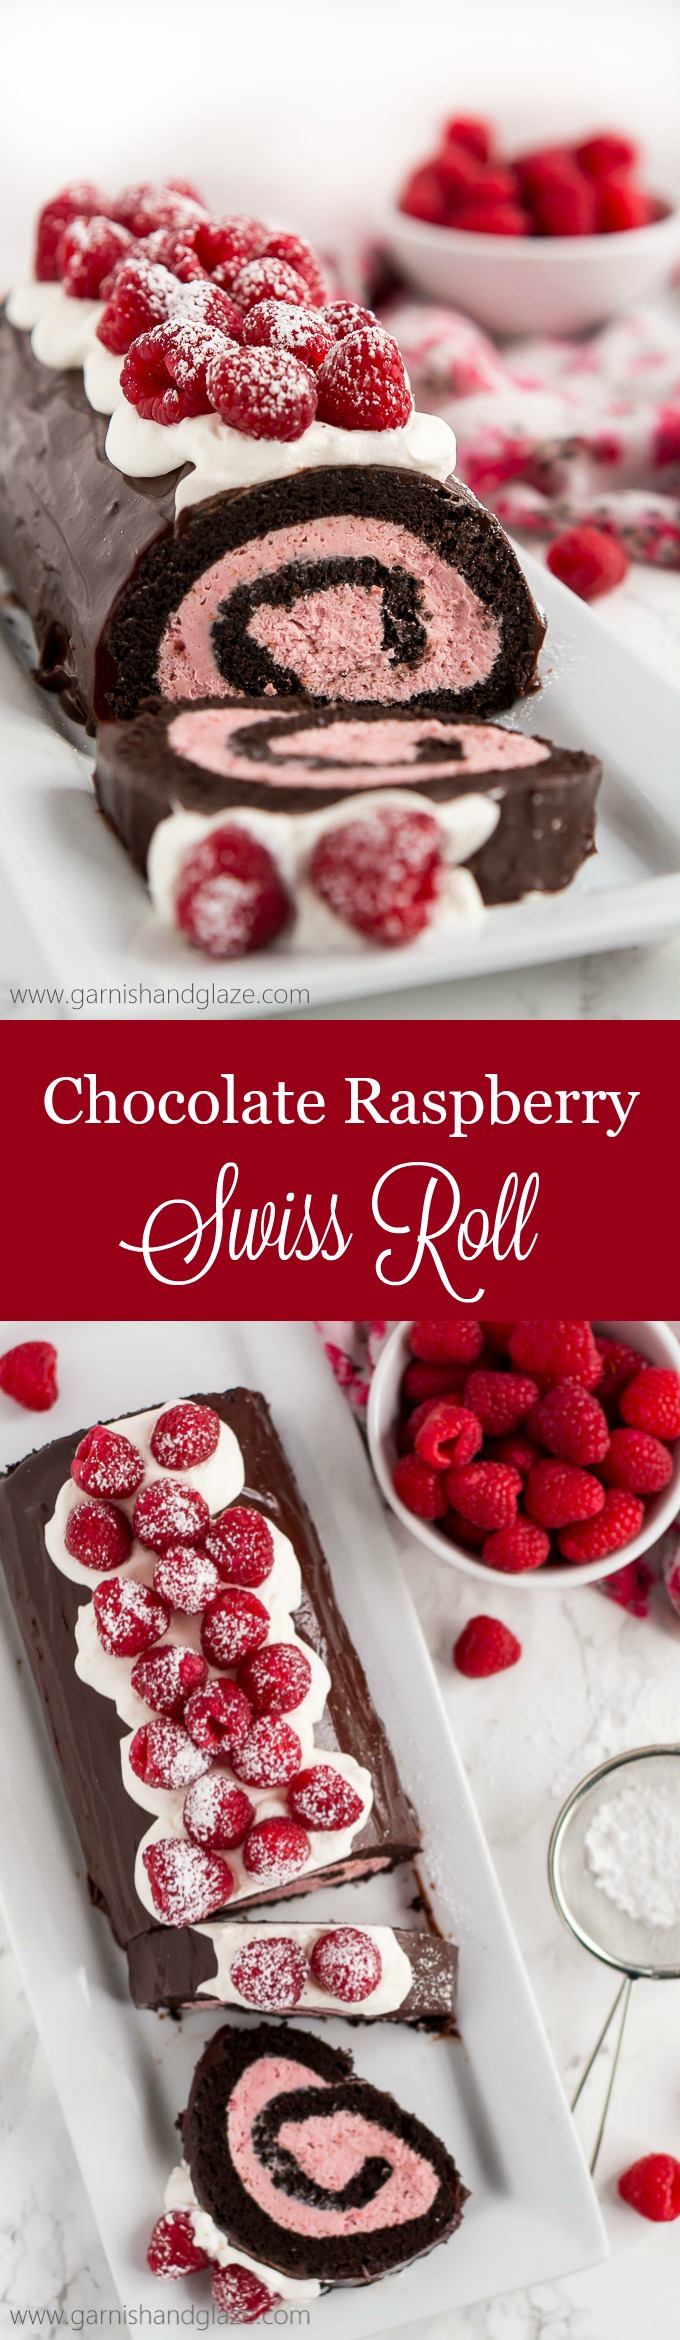 With raspberry cream filling, chocolate ganache, whipped cream, and fresh berries, this Raspberry Chocolate Swiss Roll is sure to make your Valentine swoon.